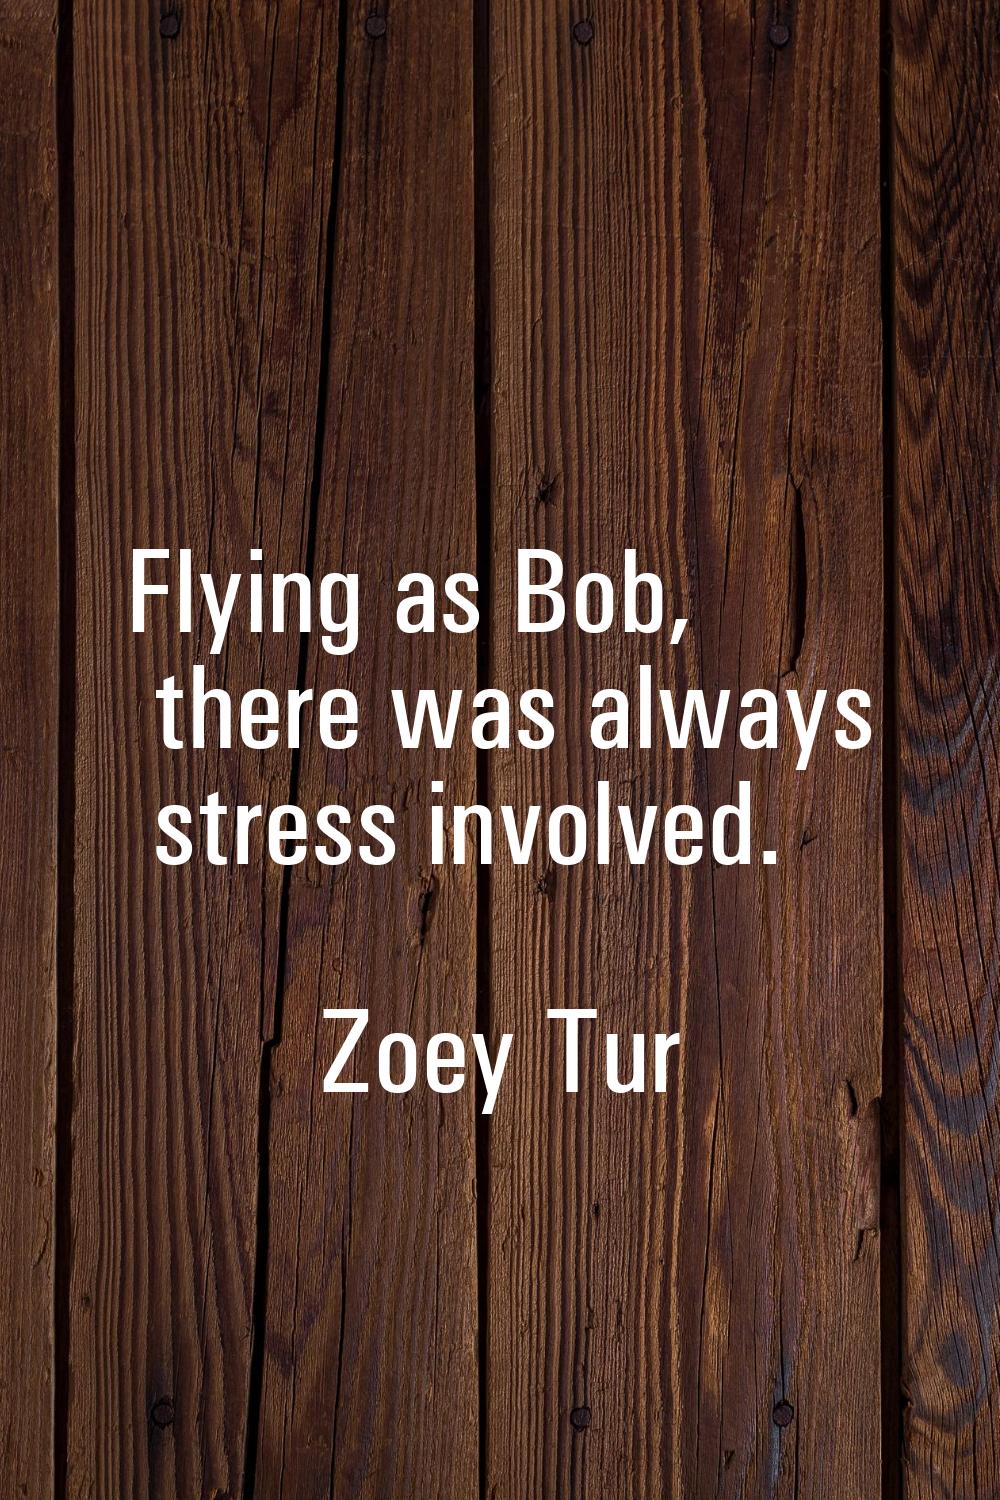 Flying as Bob, there was always stress involved.